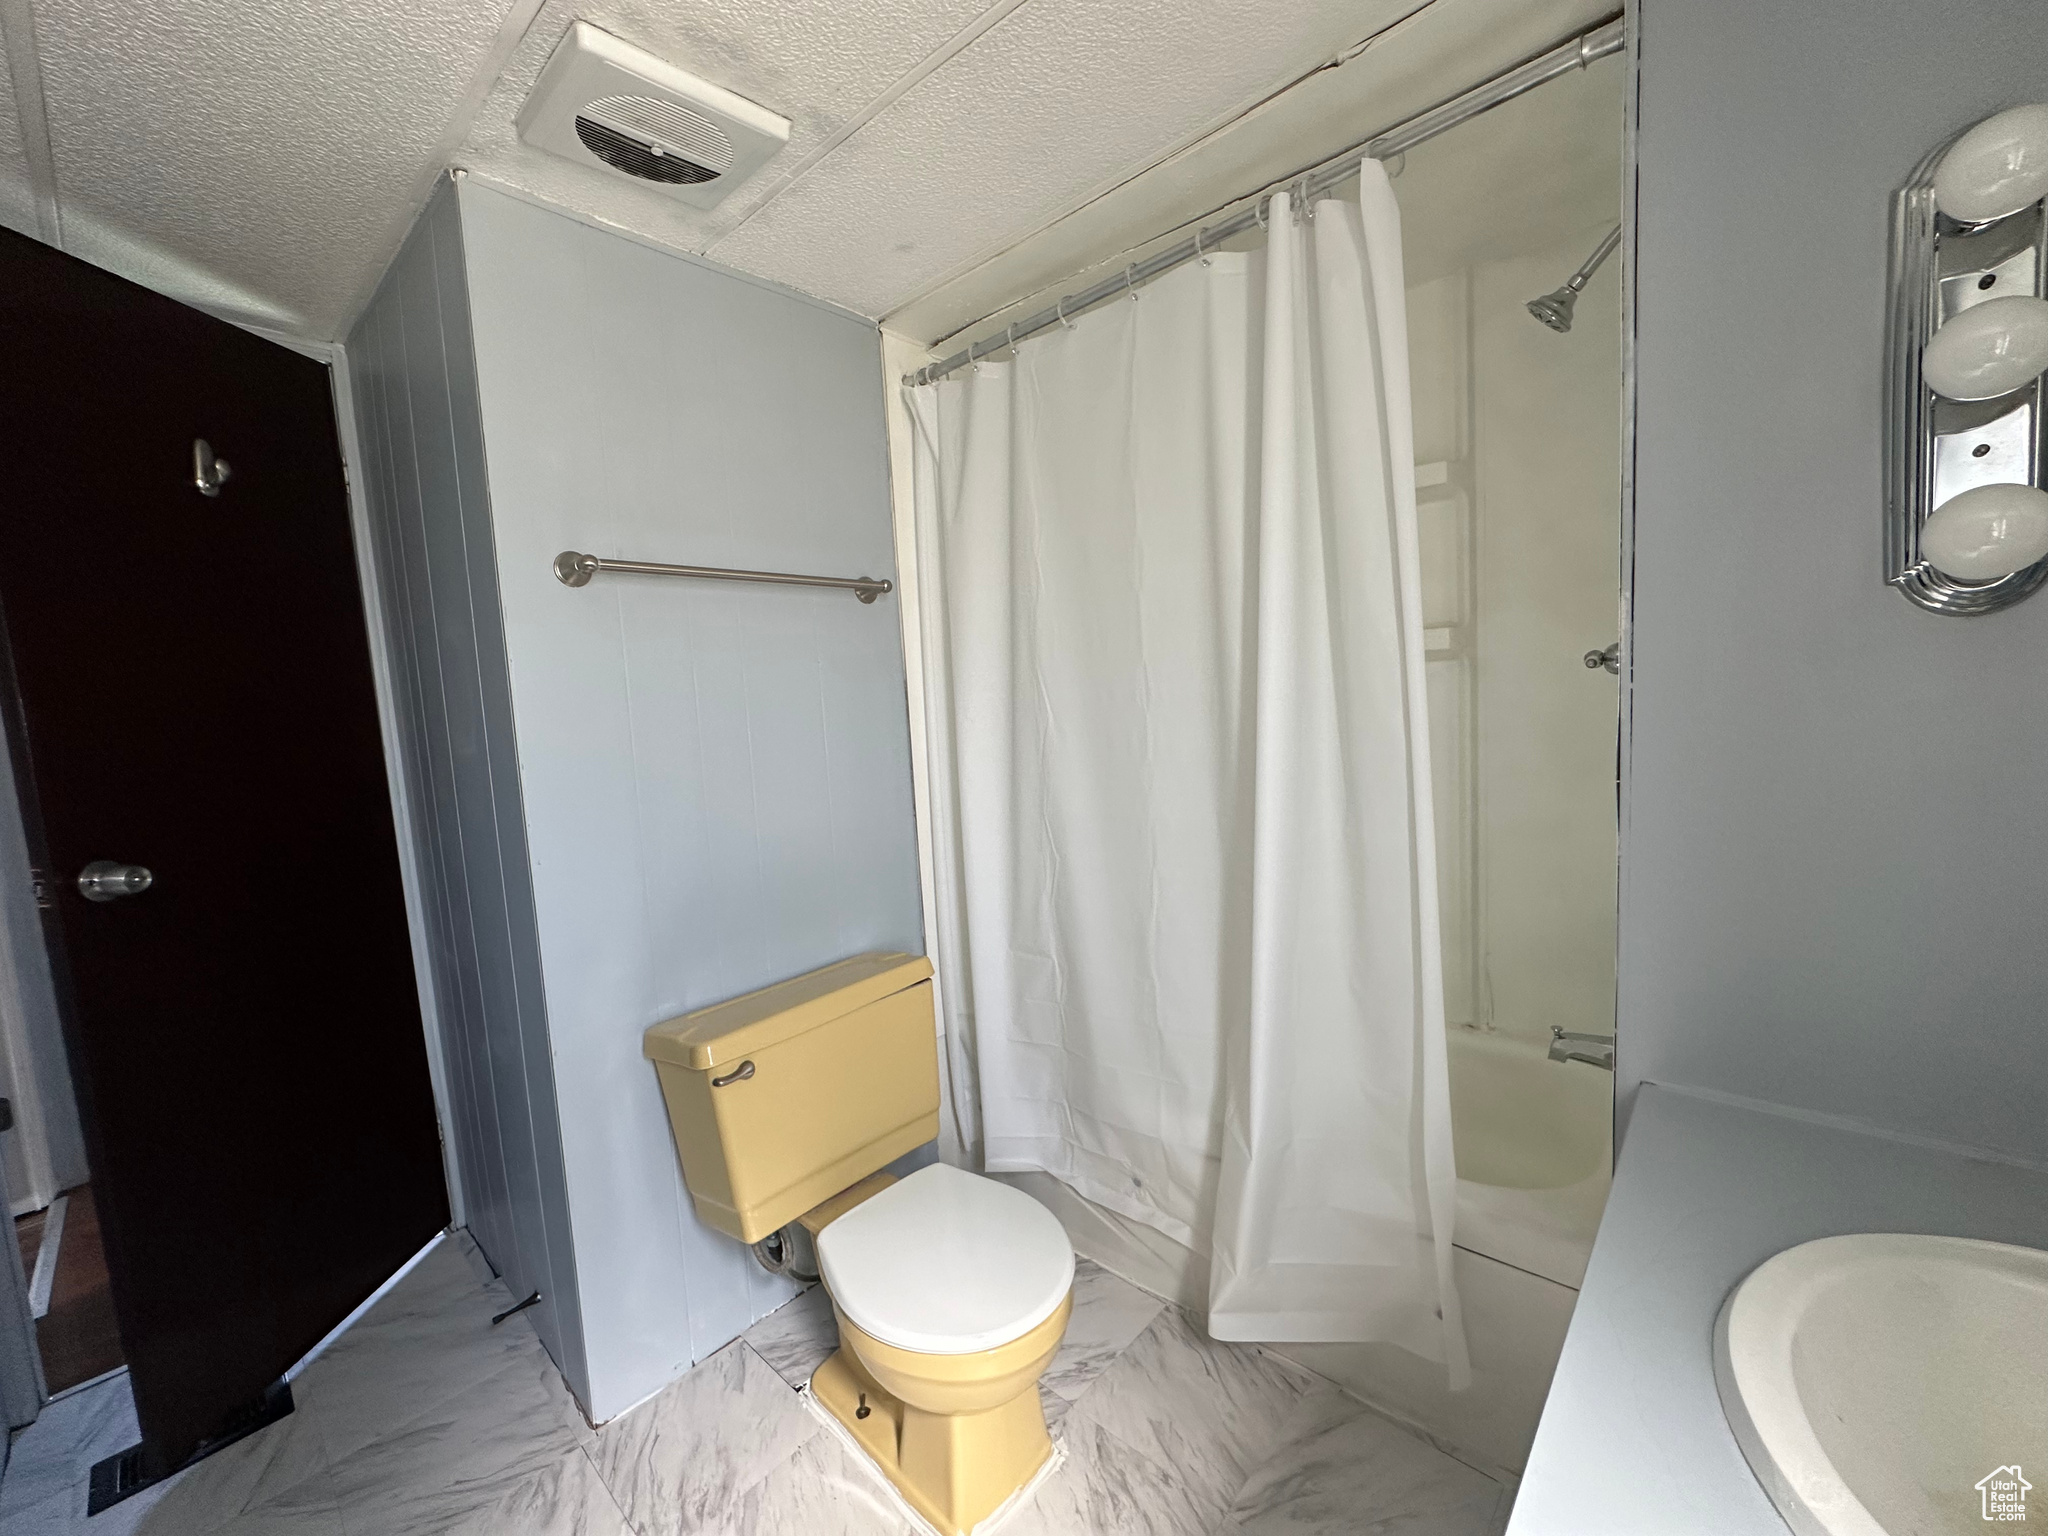 Full bathroom with a textured ceiling, tile floors, shower / tub combo with curtain, sink, and toilet